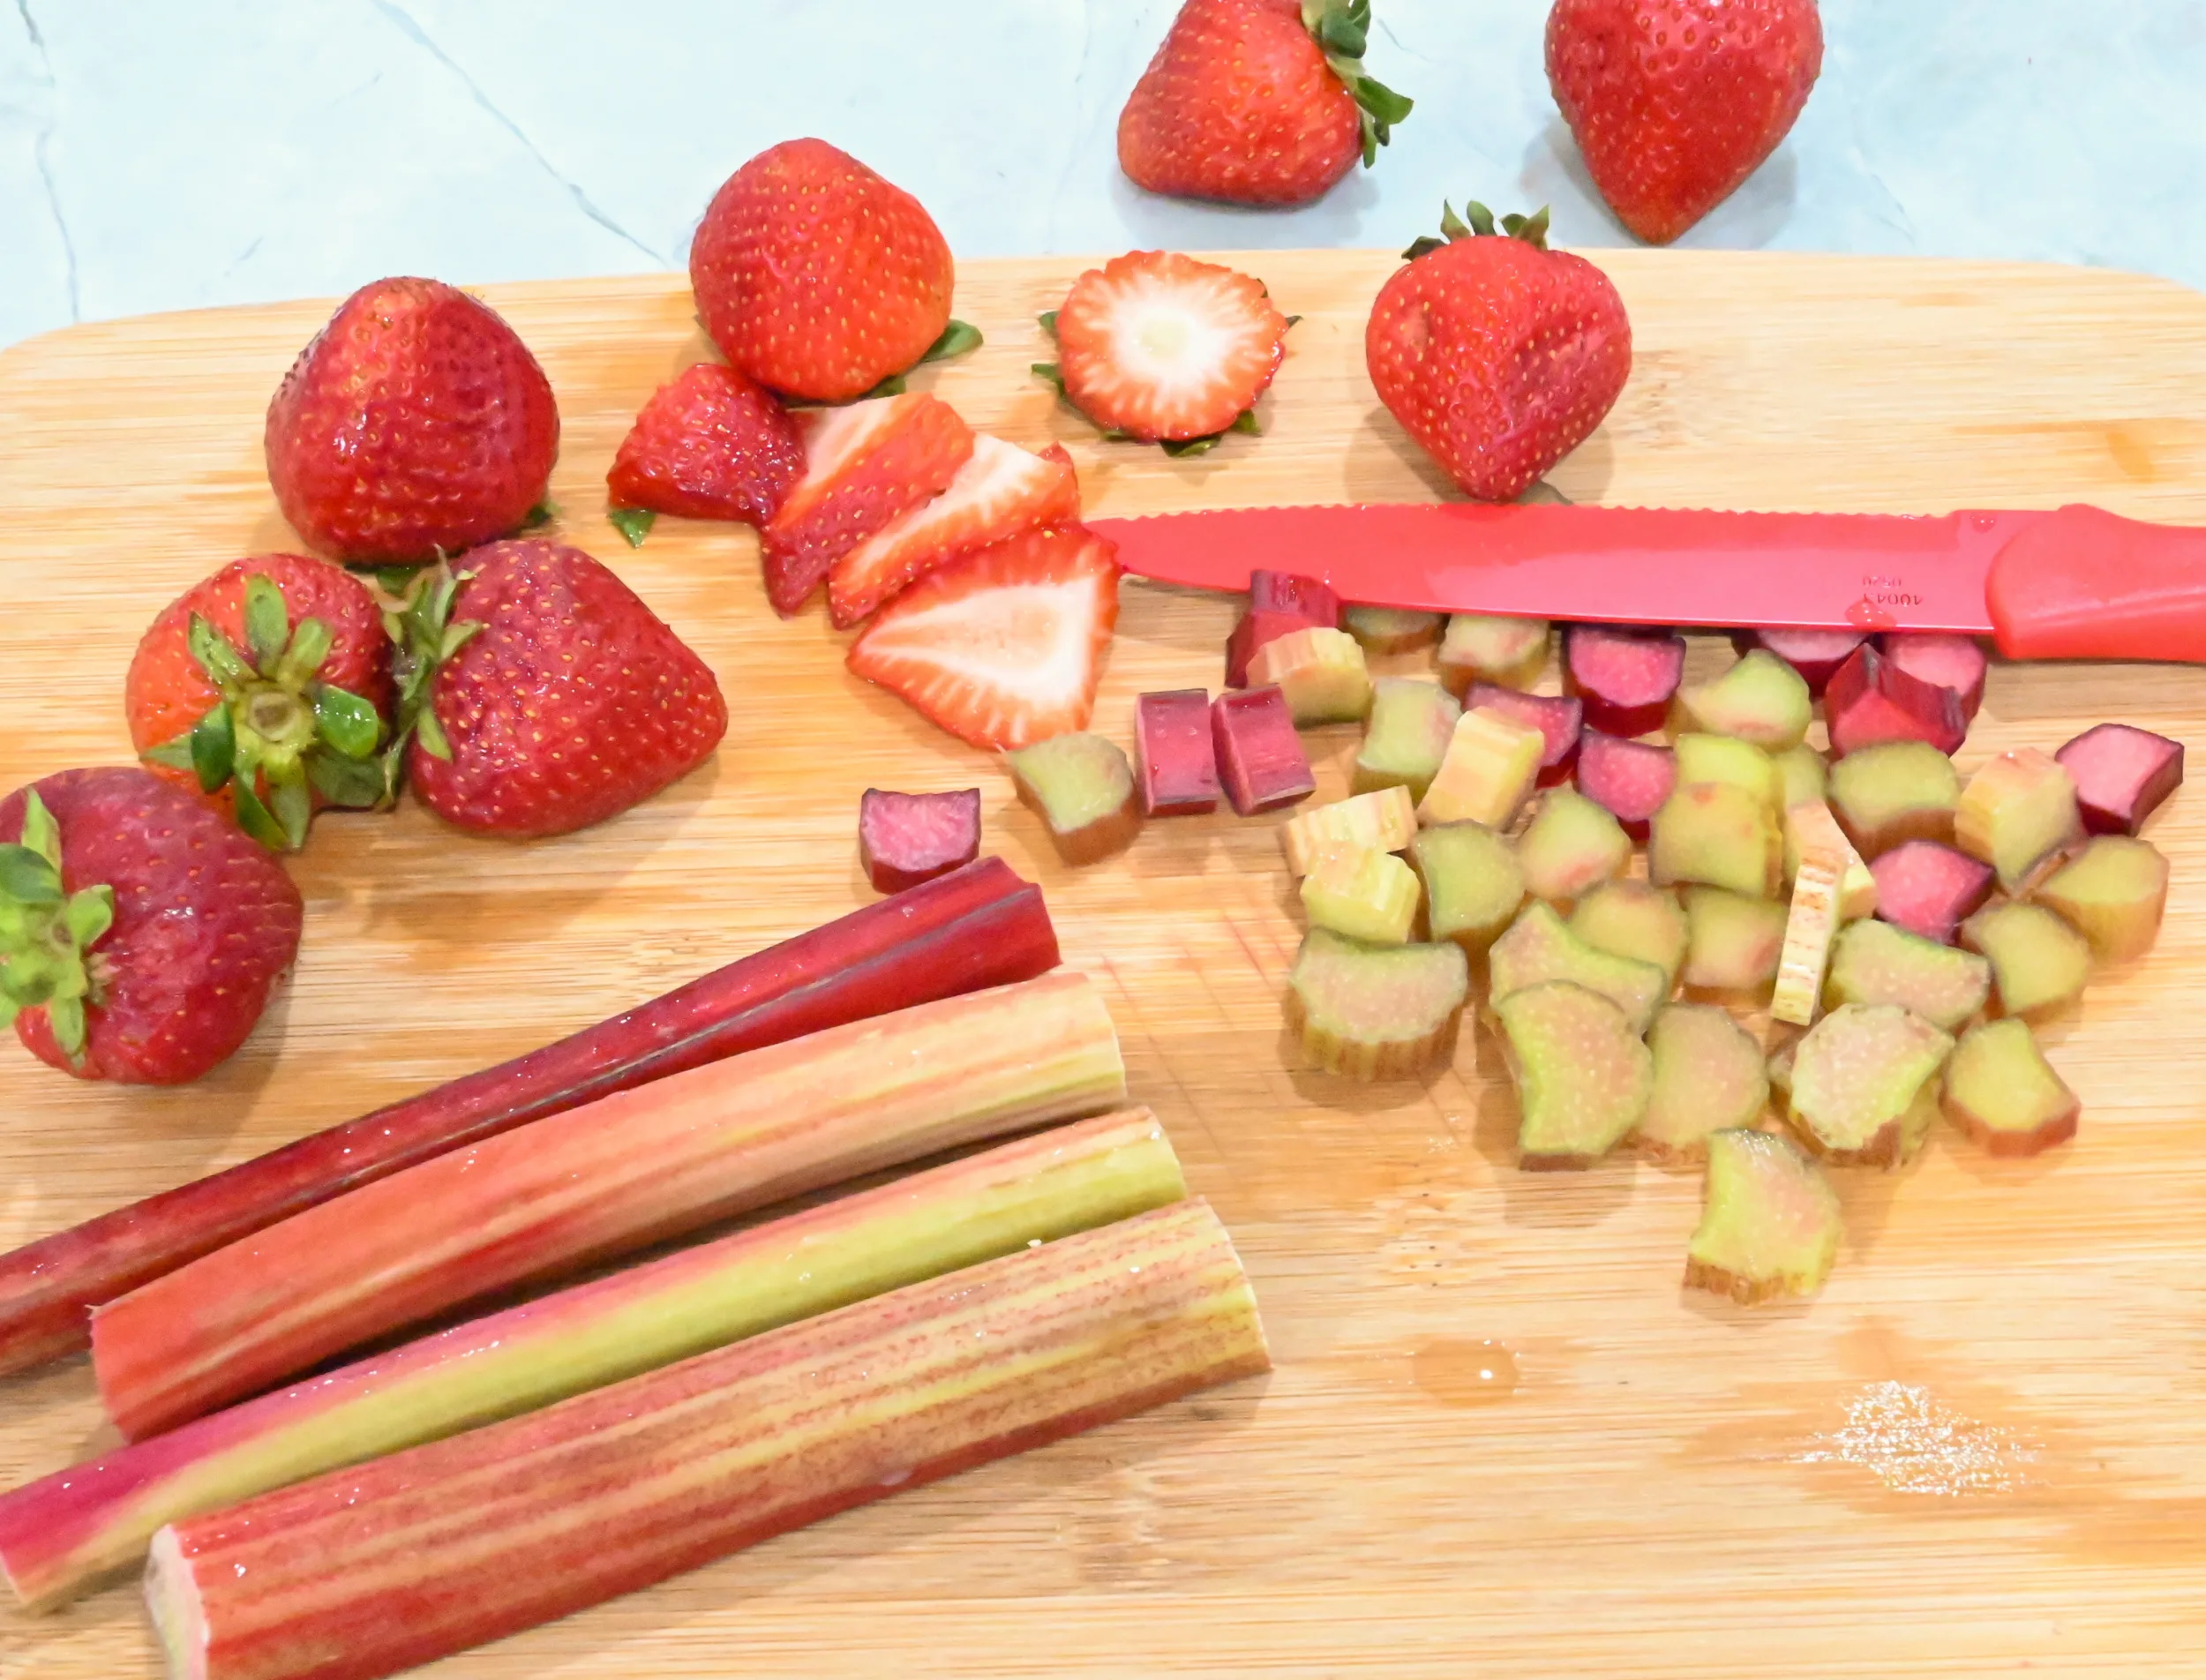 strawberry and rhubarb slices